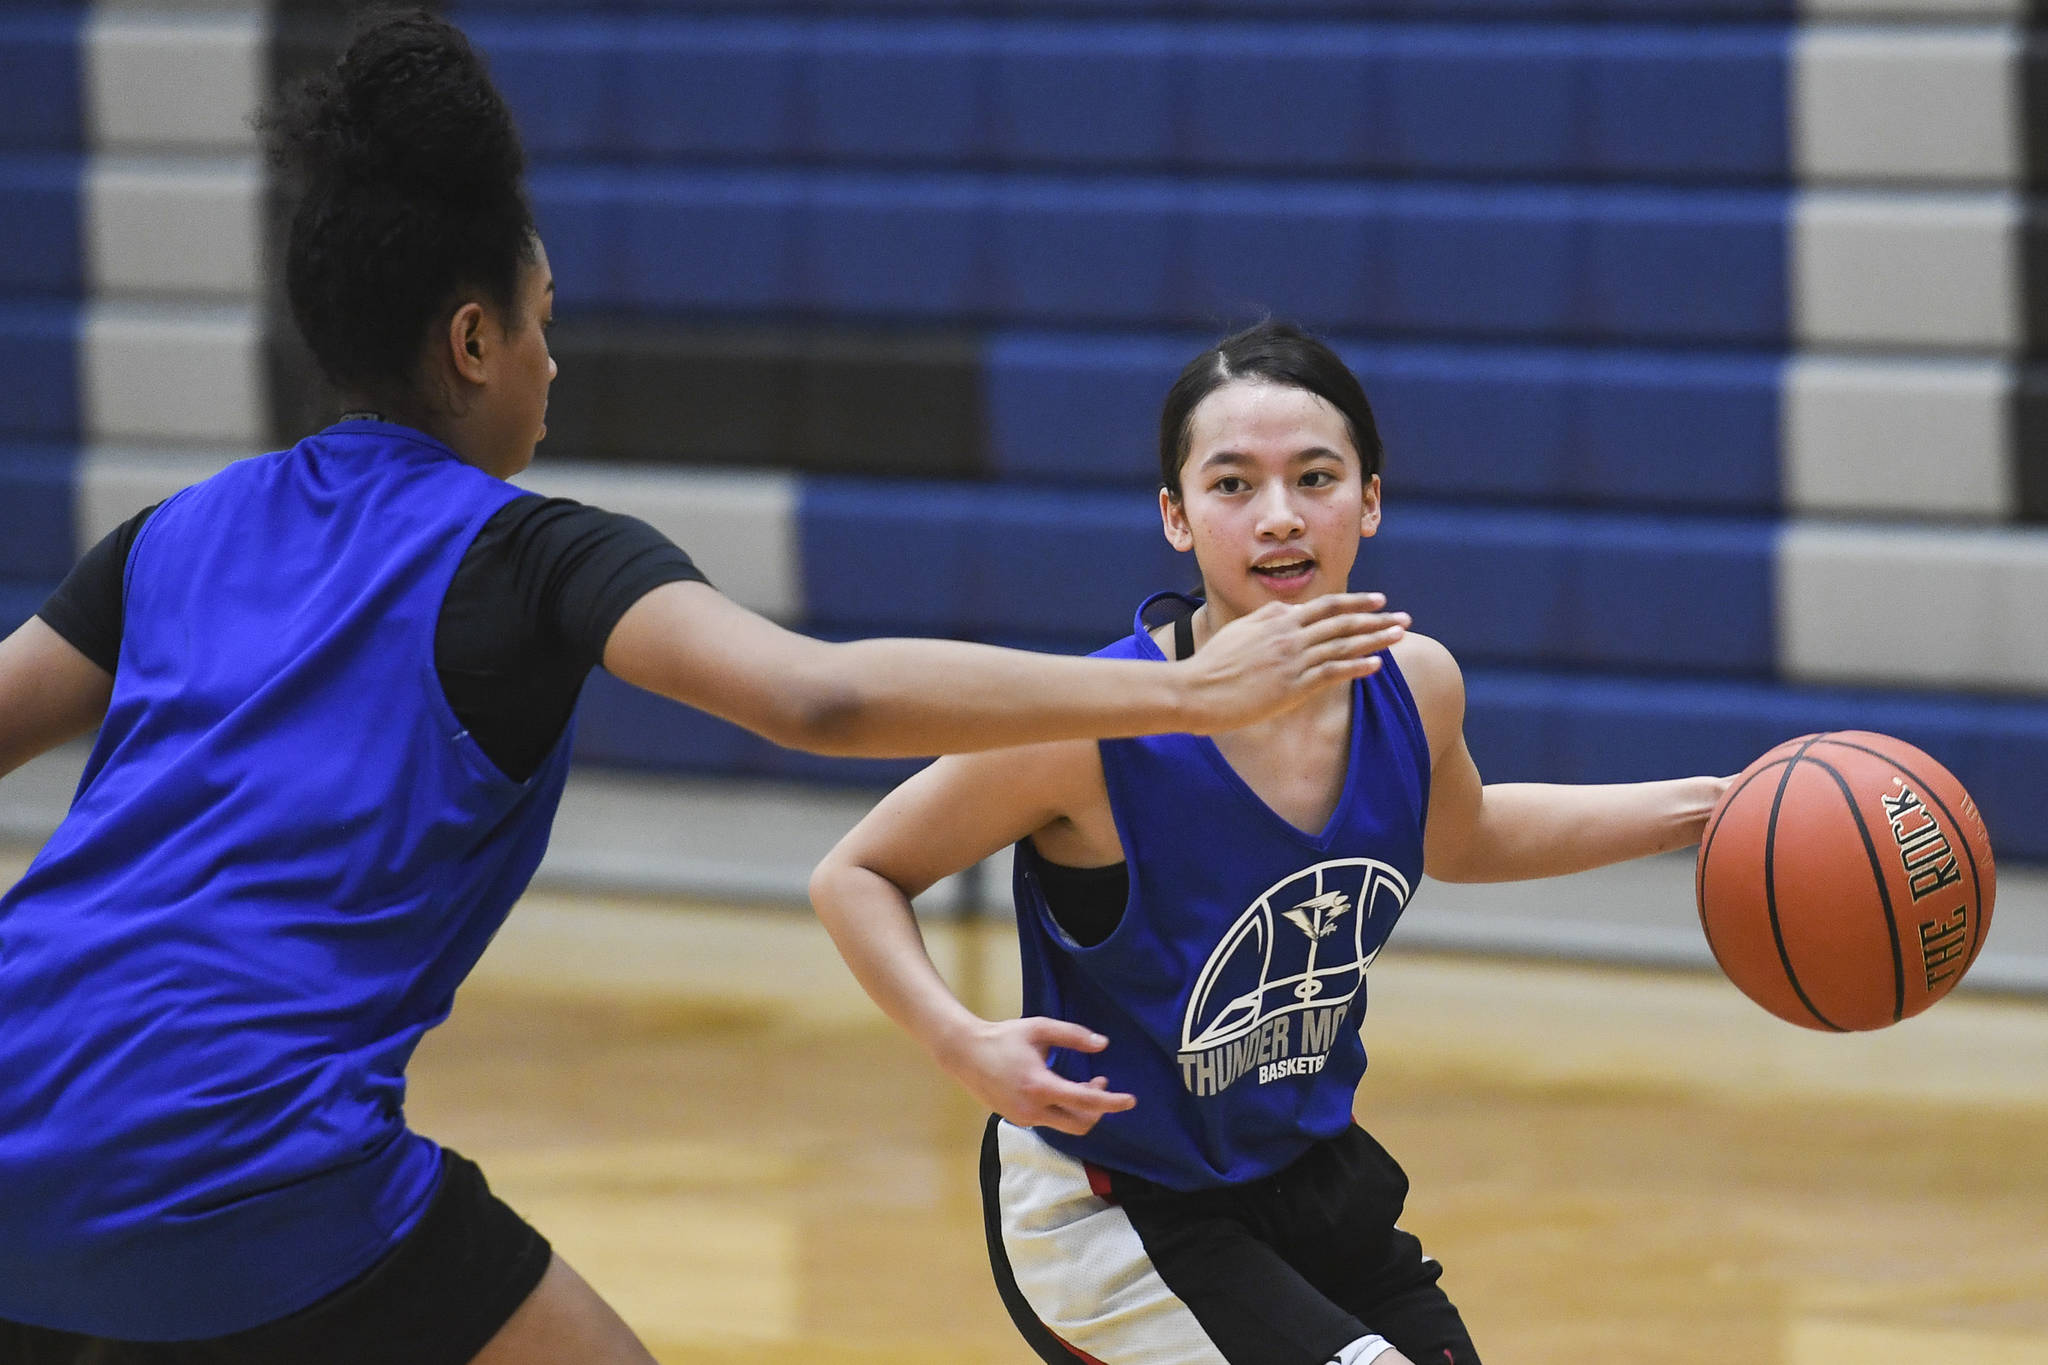 Mary Neal Garcia, right, is guarded by Iayanah Brewer during the girls varsity basketball practice at Thunder Mountain High School on Monday, Dec. 9, 2019. (Michael Penn | Juneau Empire)